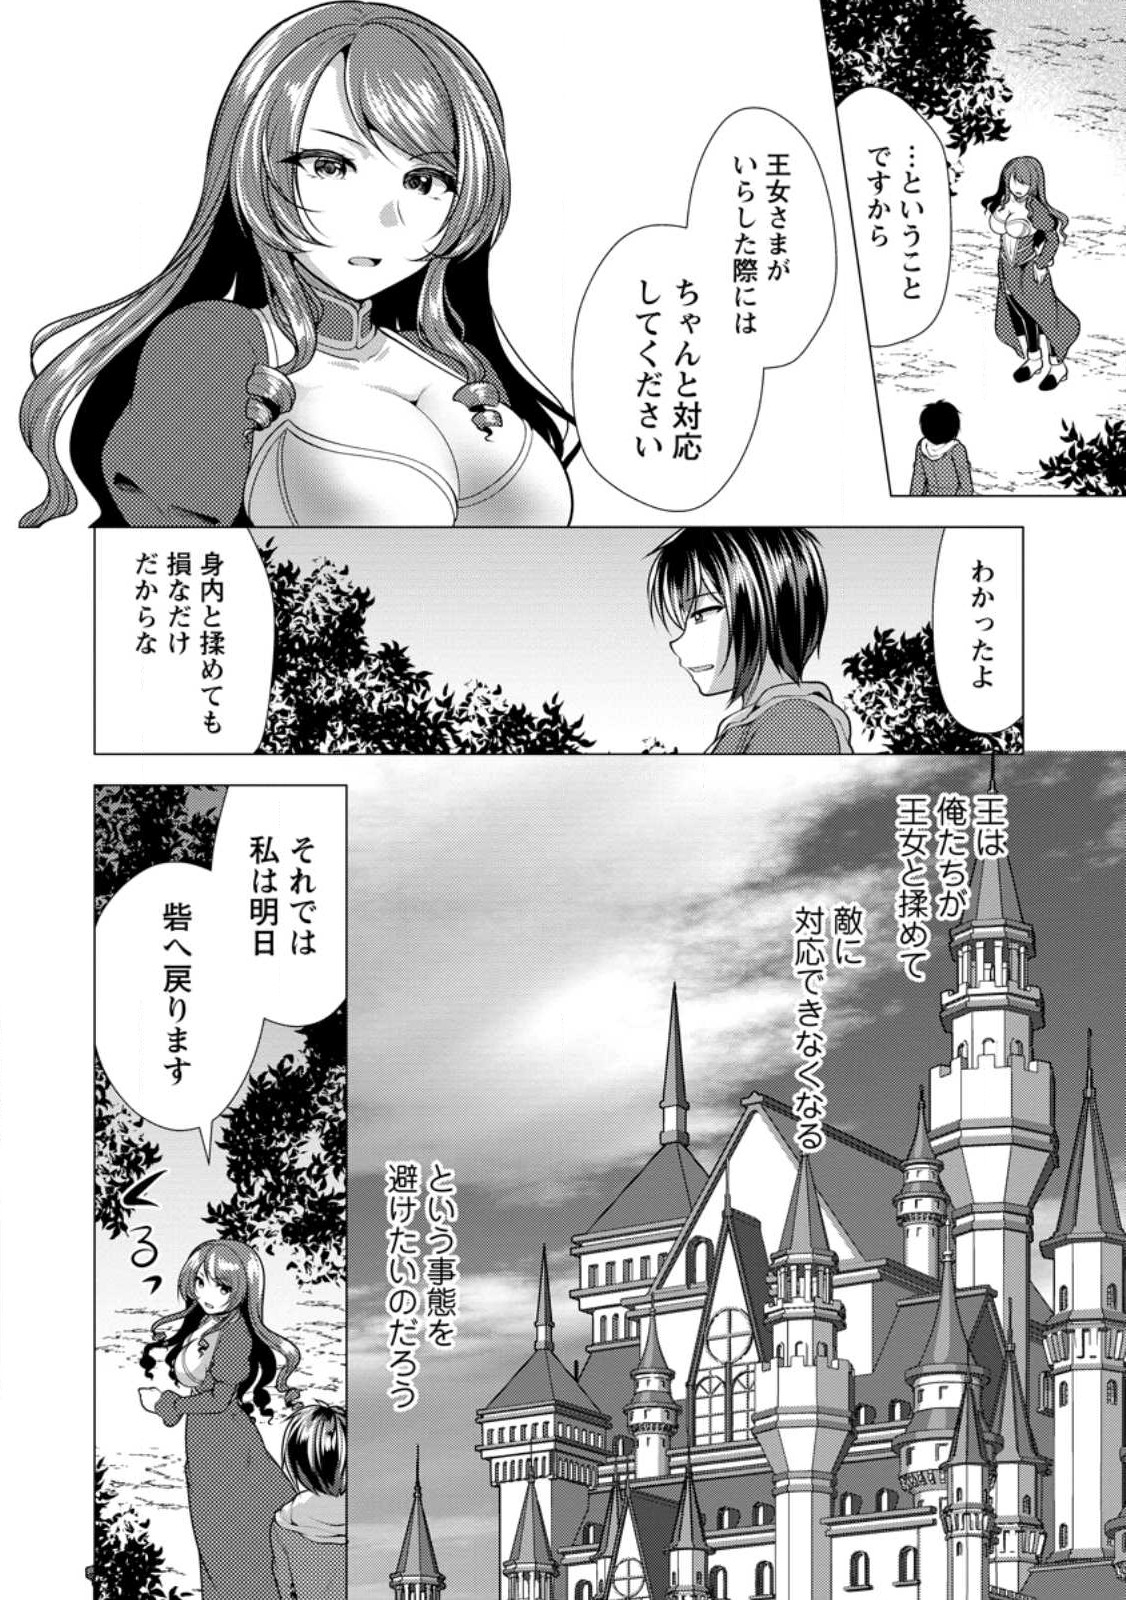 Hisshou Dungeon Unei Houhou - Chapter 60.1 - Page 2